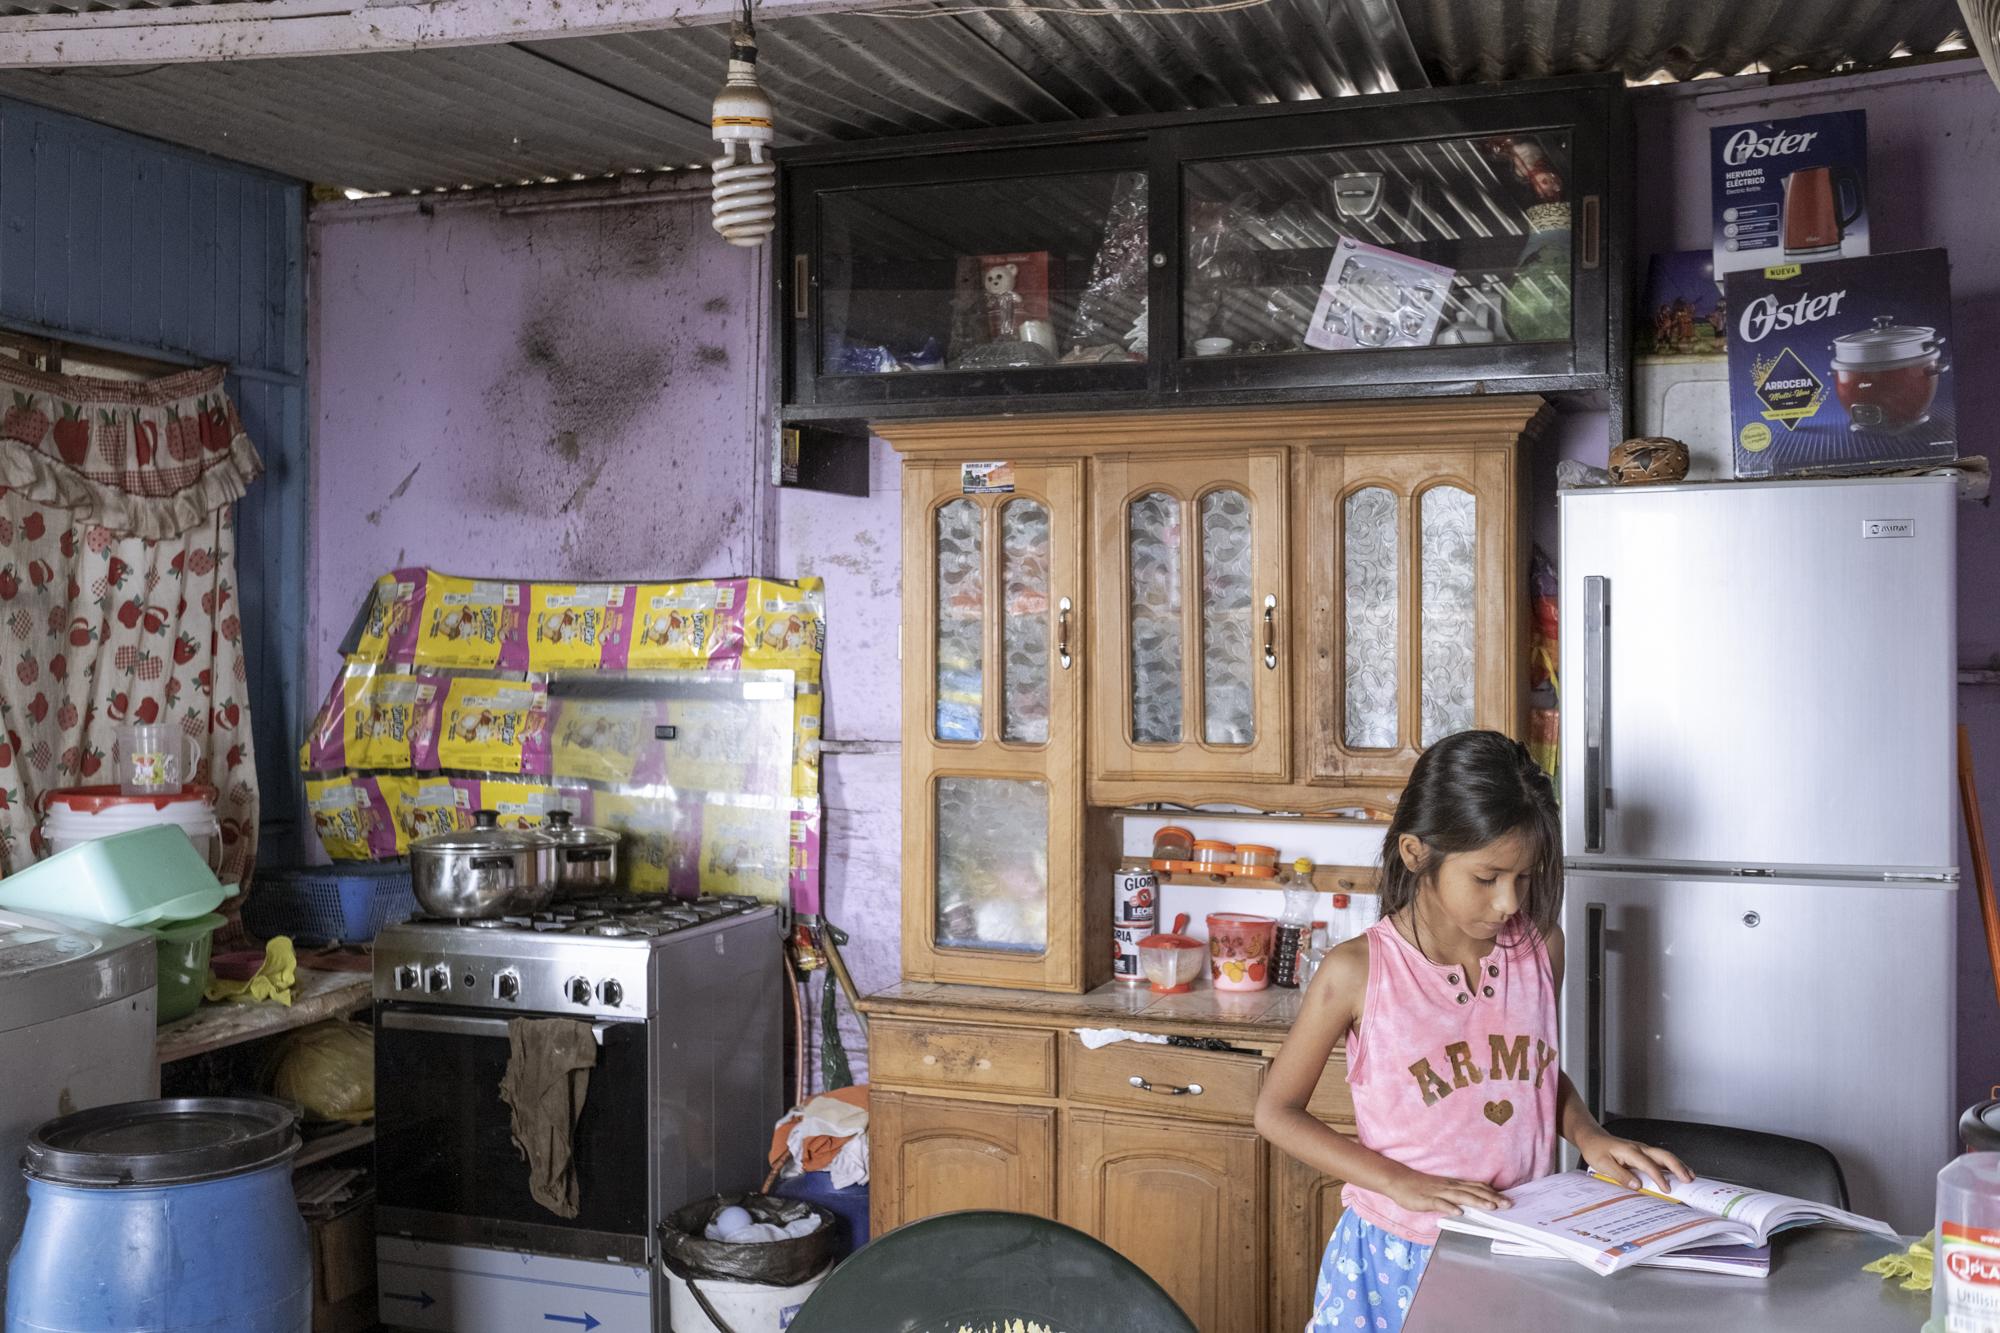 Lost generation of Covid - Portrait of Chandel Ampiche (9) studying in the kitchen...